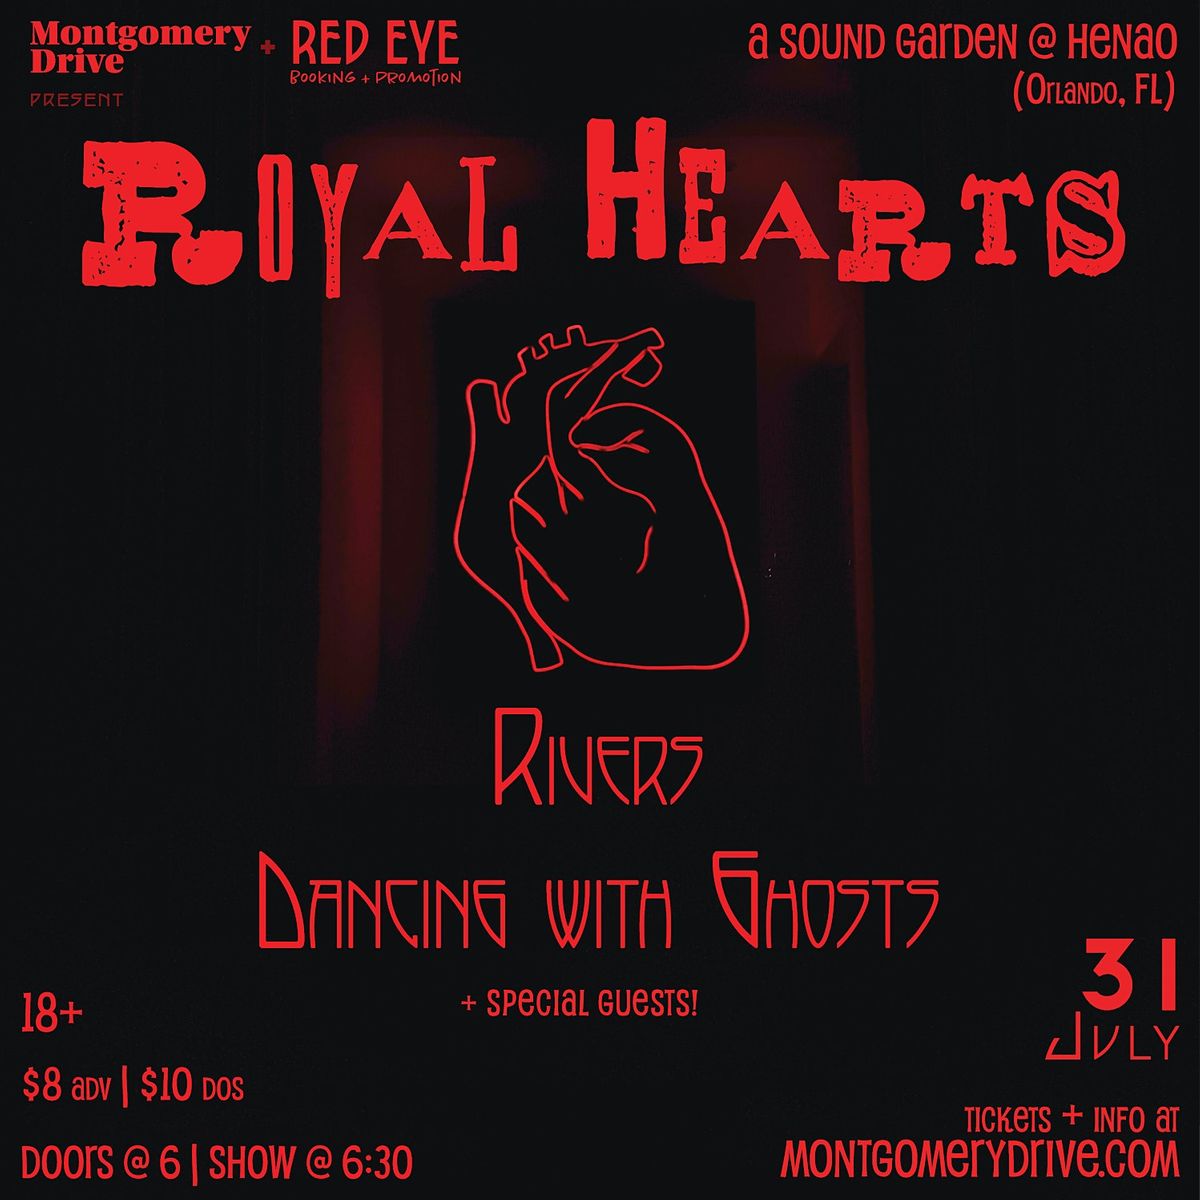 Royal Hearts with Rivers, Dancing With Ghosts plus Special Guests!